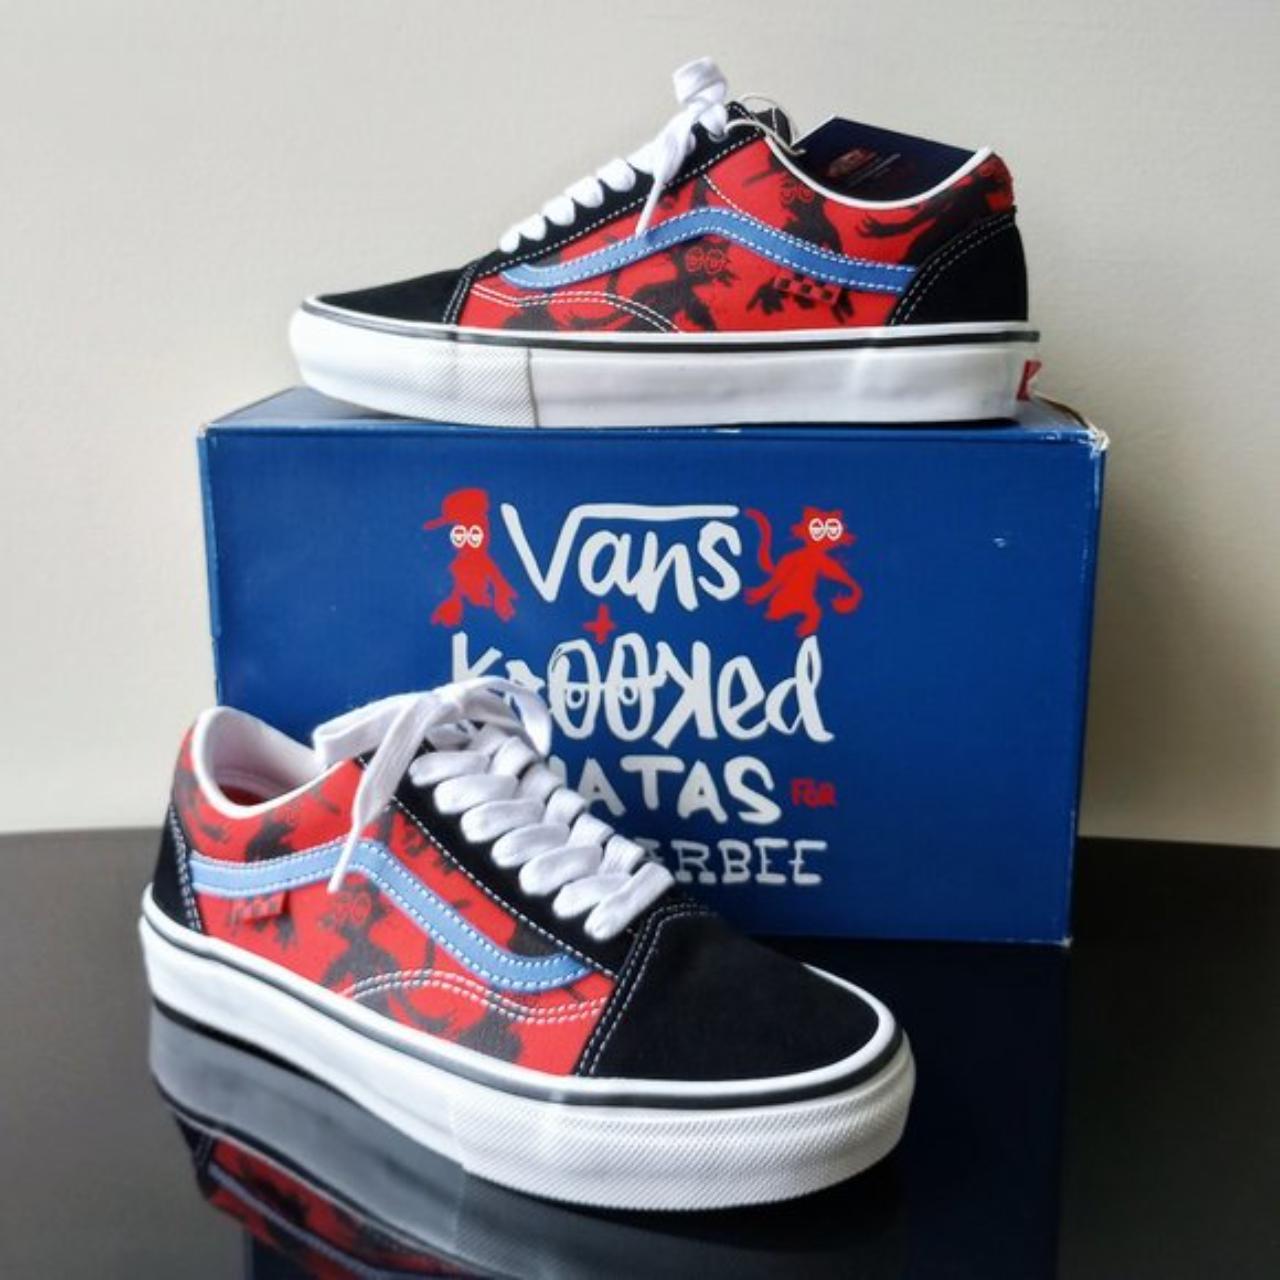 Vans Old Skool Pro Krooked by Natas For Ray – The Joker Shop